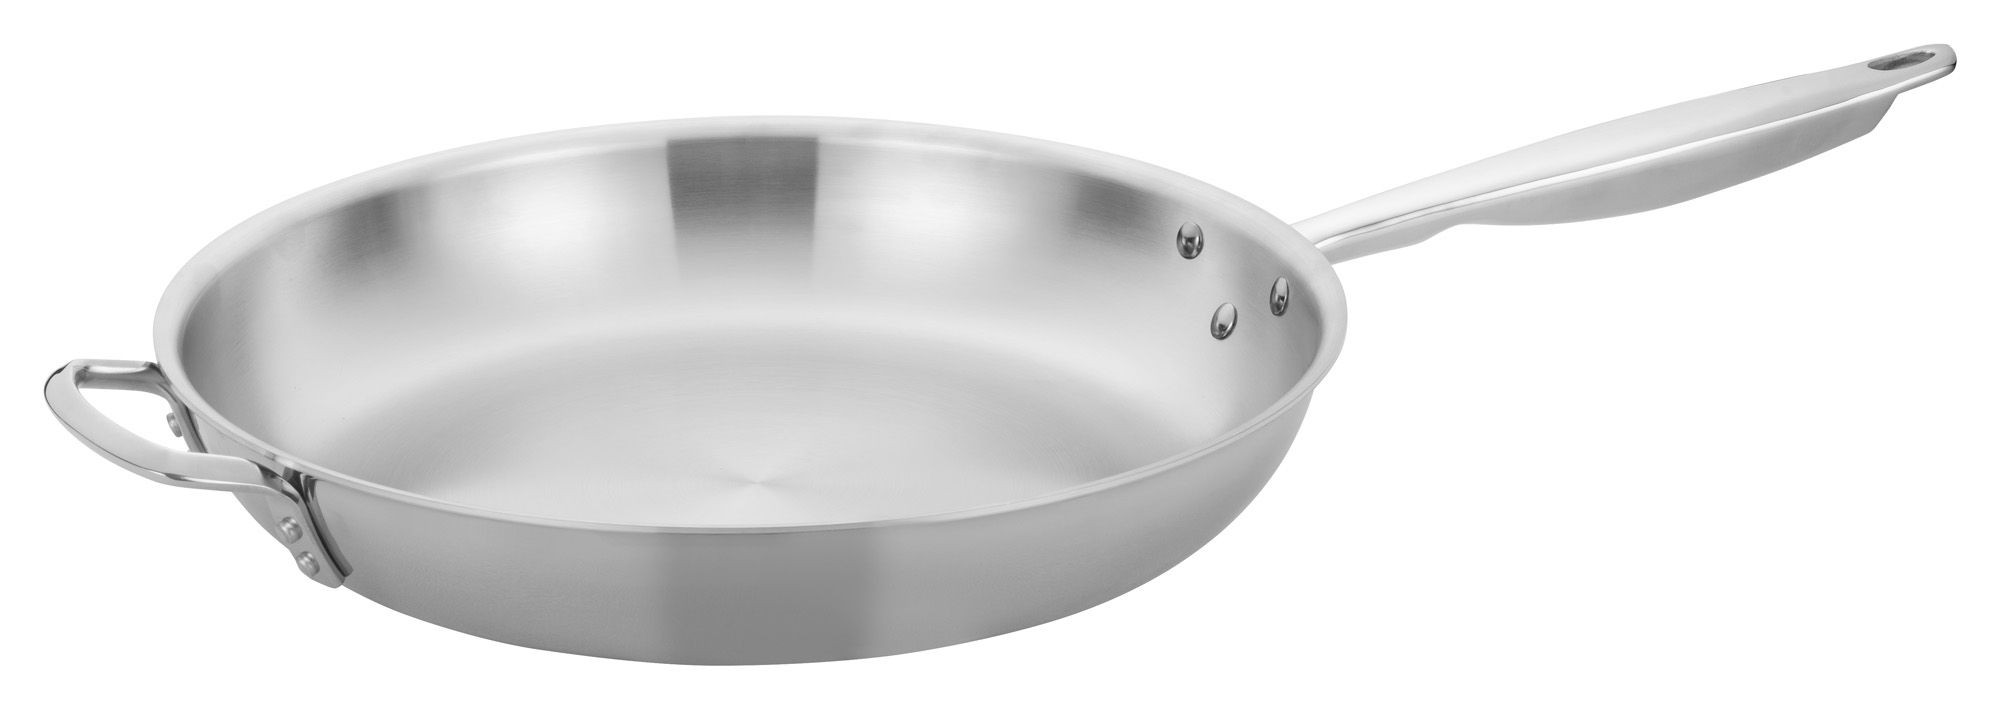 Winco TGFP-14 Tri-Ply Stainless Steel Natural Finish Fry Pan, 14"